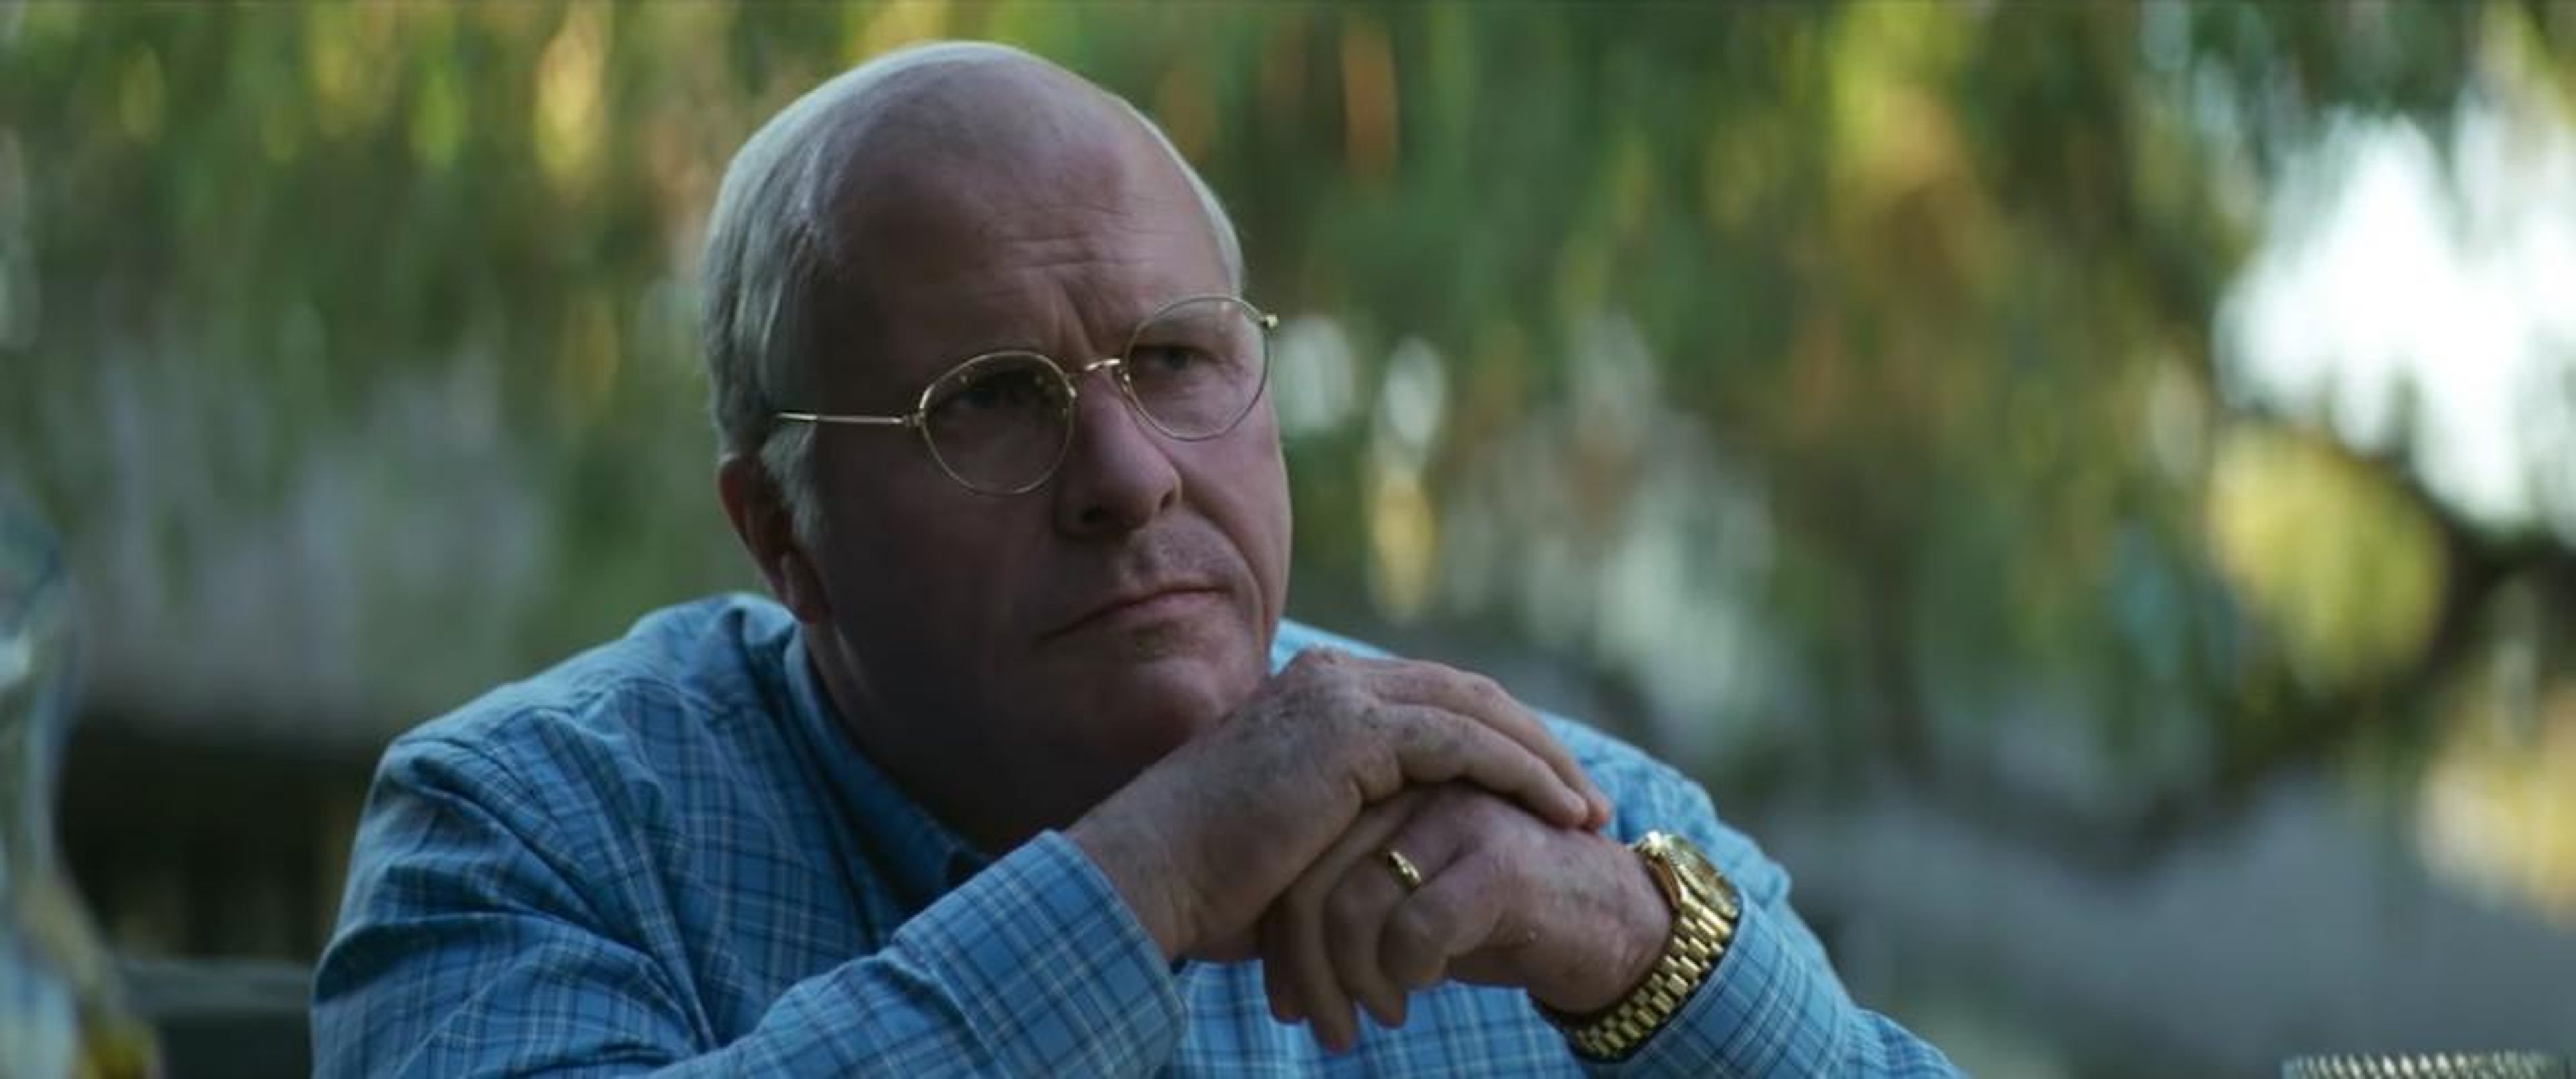 Christian Bale in "Vice."